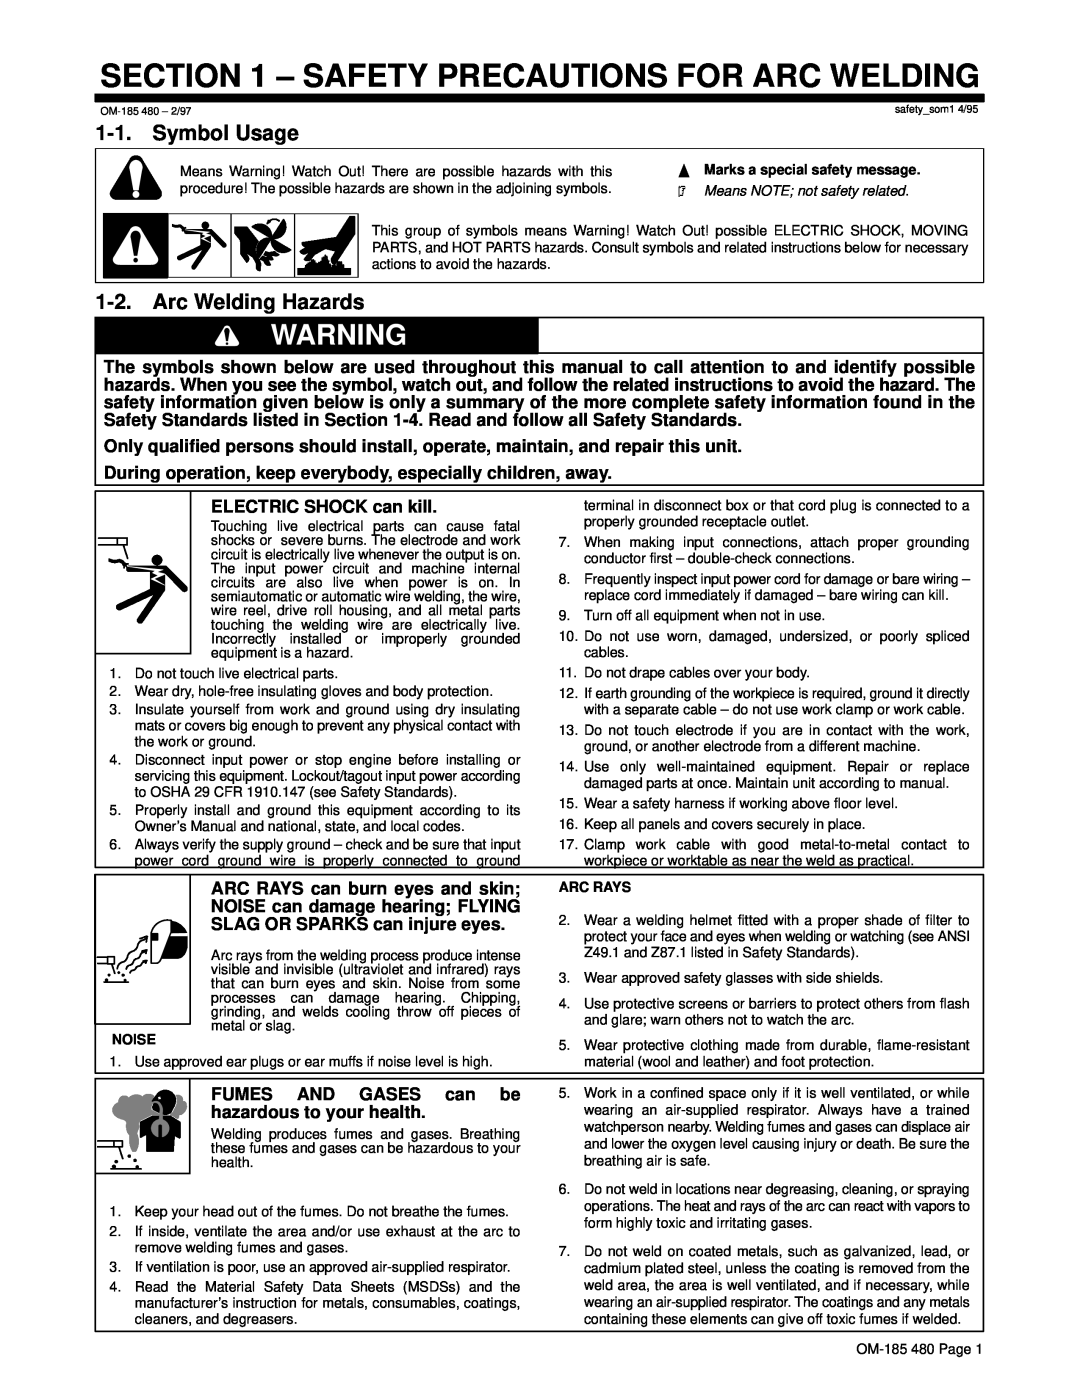 Hobart Welding Products HWC-115A Safety Precautions For Arc Welding, Symbol Usage, Arc Welding Hazards, Noise, Arc Rays 